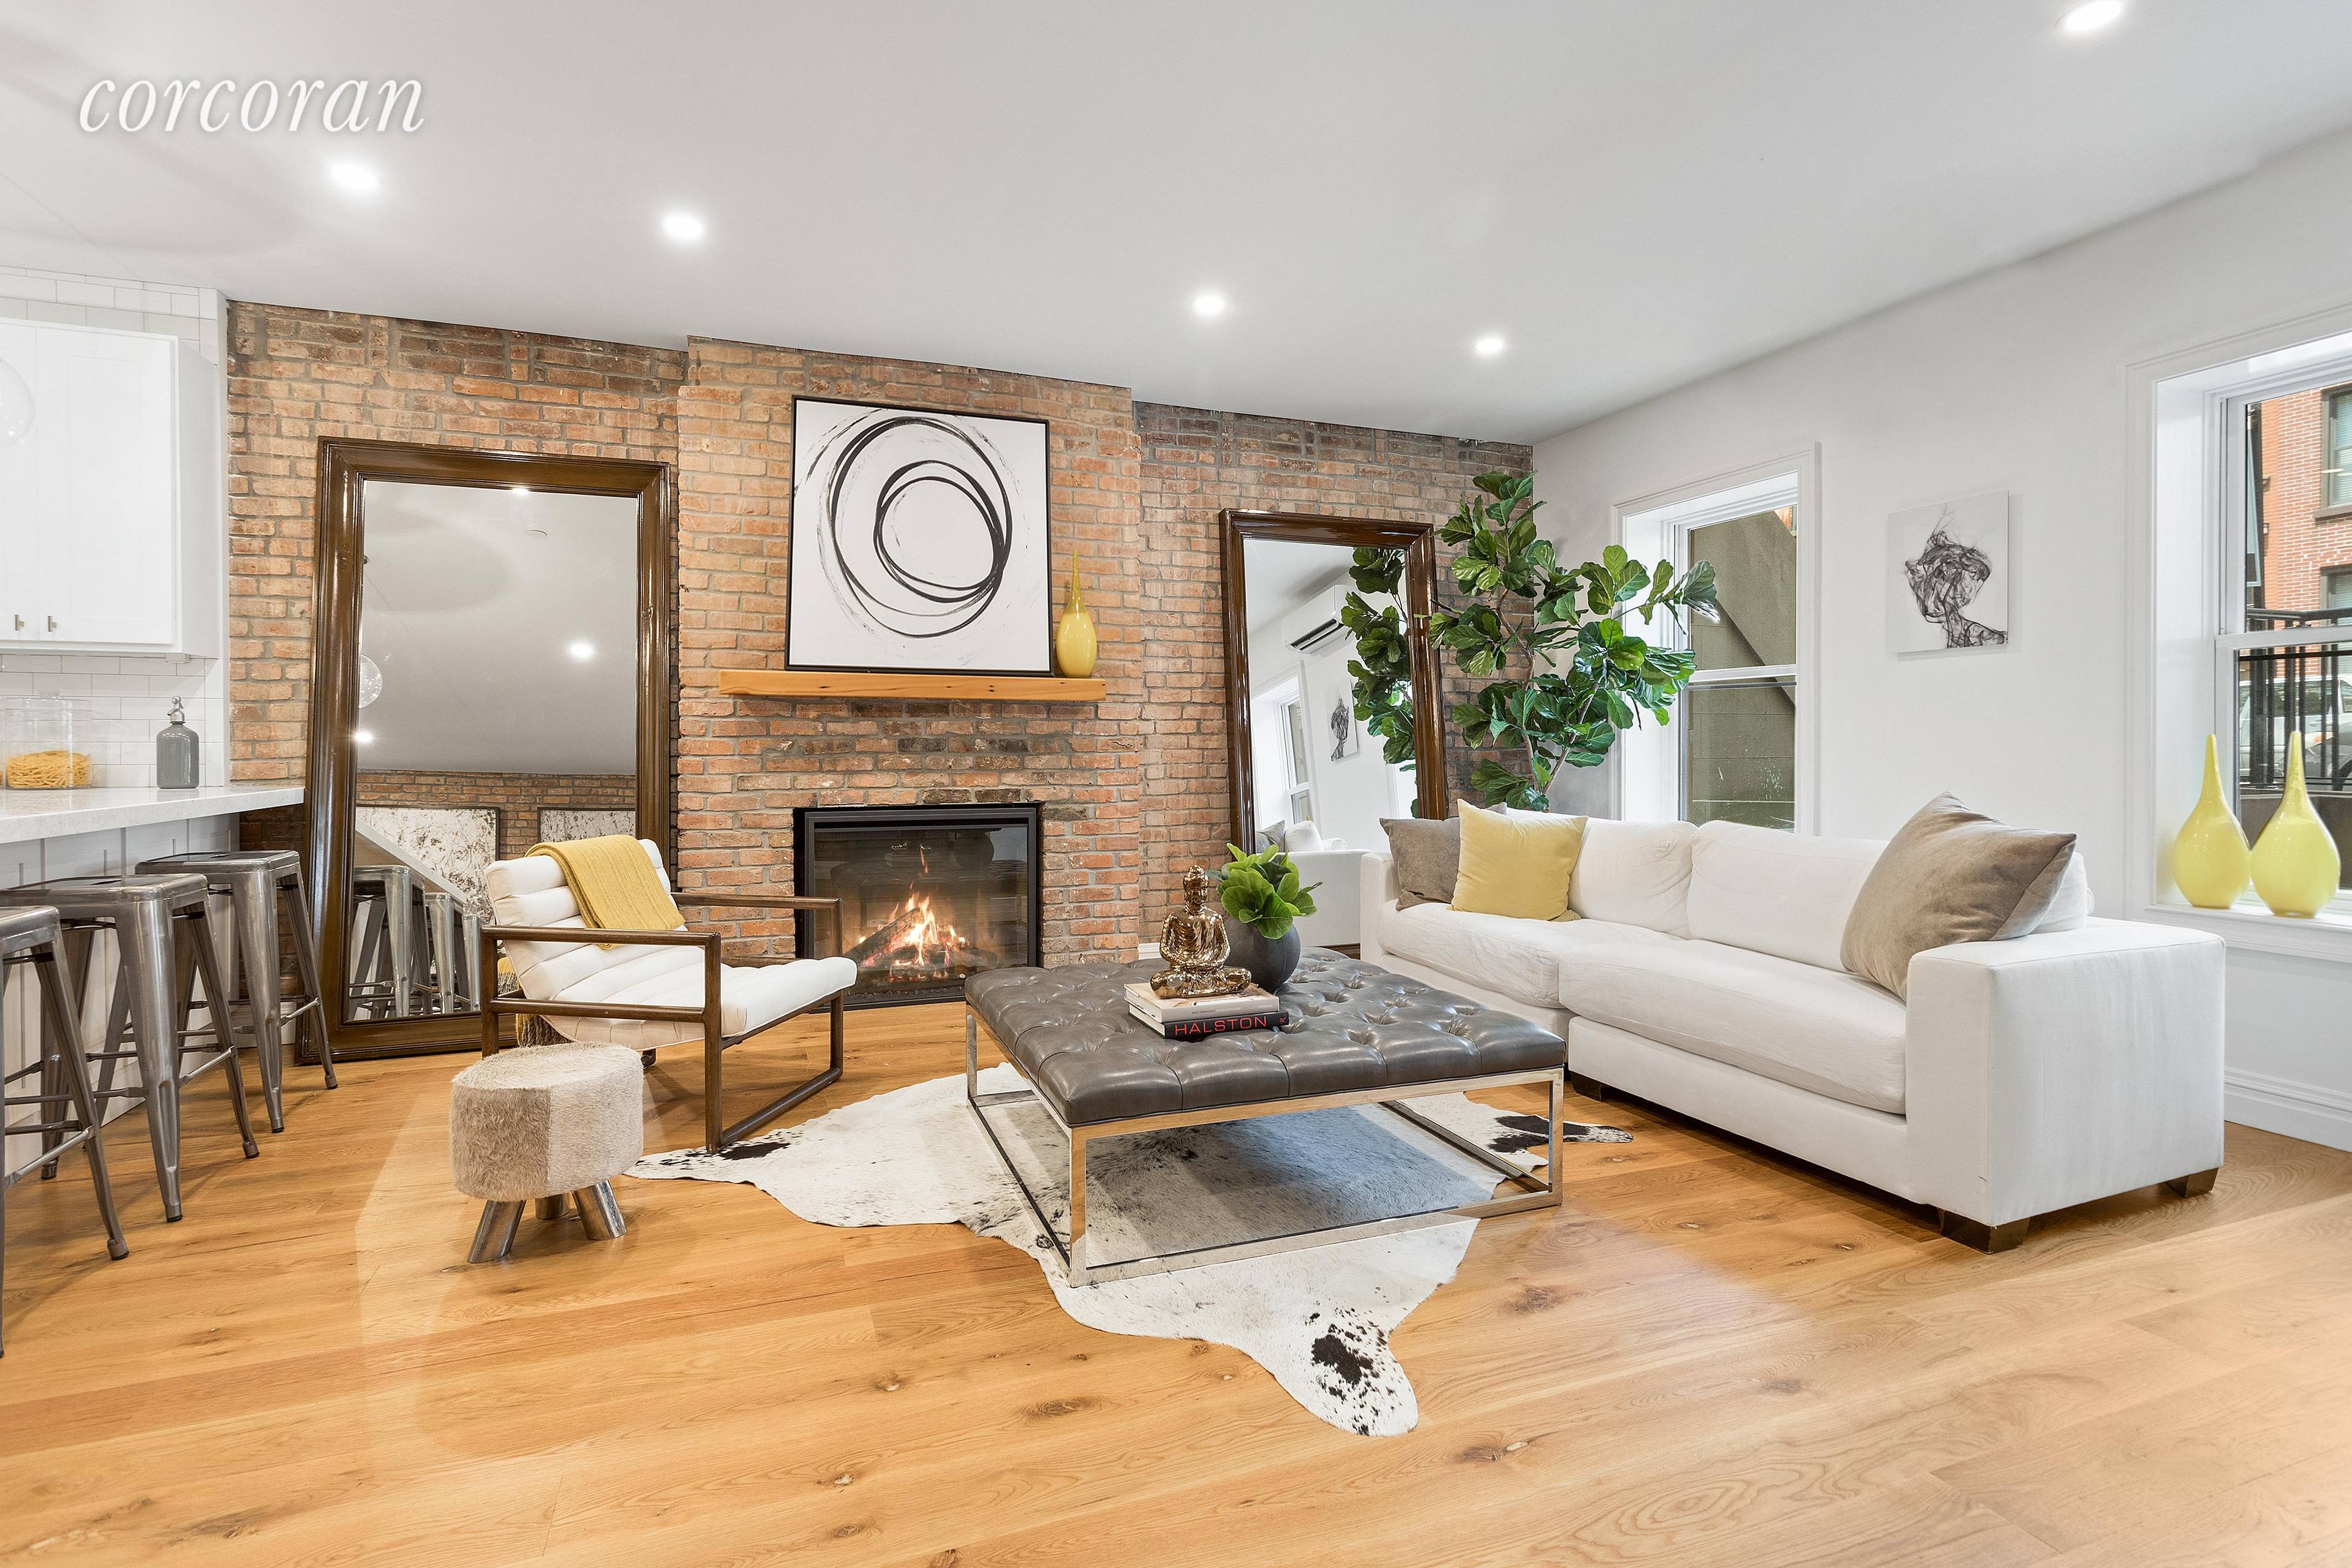 Welcome home to 154 Nelson Street, this thoughtfully designed and meticulously finished garden duplex is set on a quiet, well preserved block in one of Brooklyn's most desirable neighborhoods.